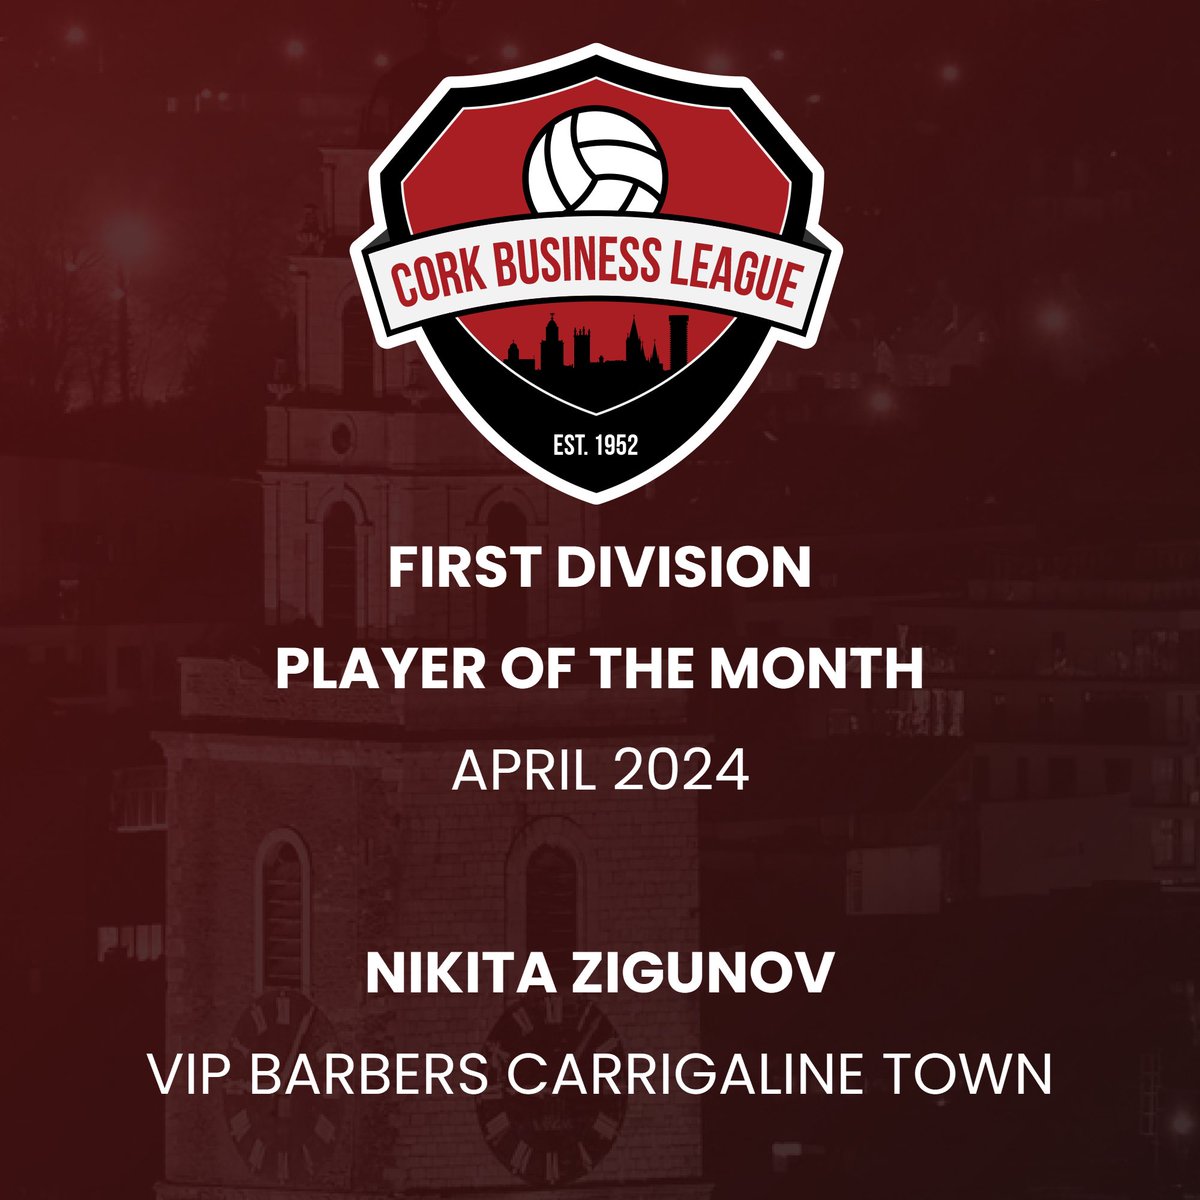 CBL First Division Player of the Month April 2024 Nikita Zigunov of VIP Barbers Carrigaline Town Congratulations!